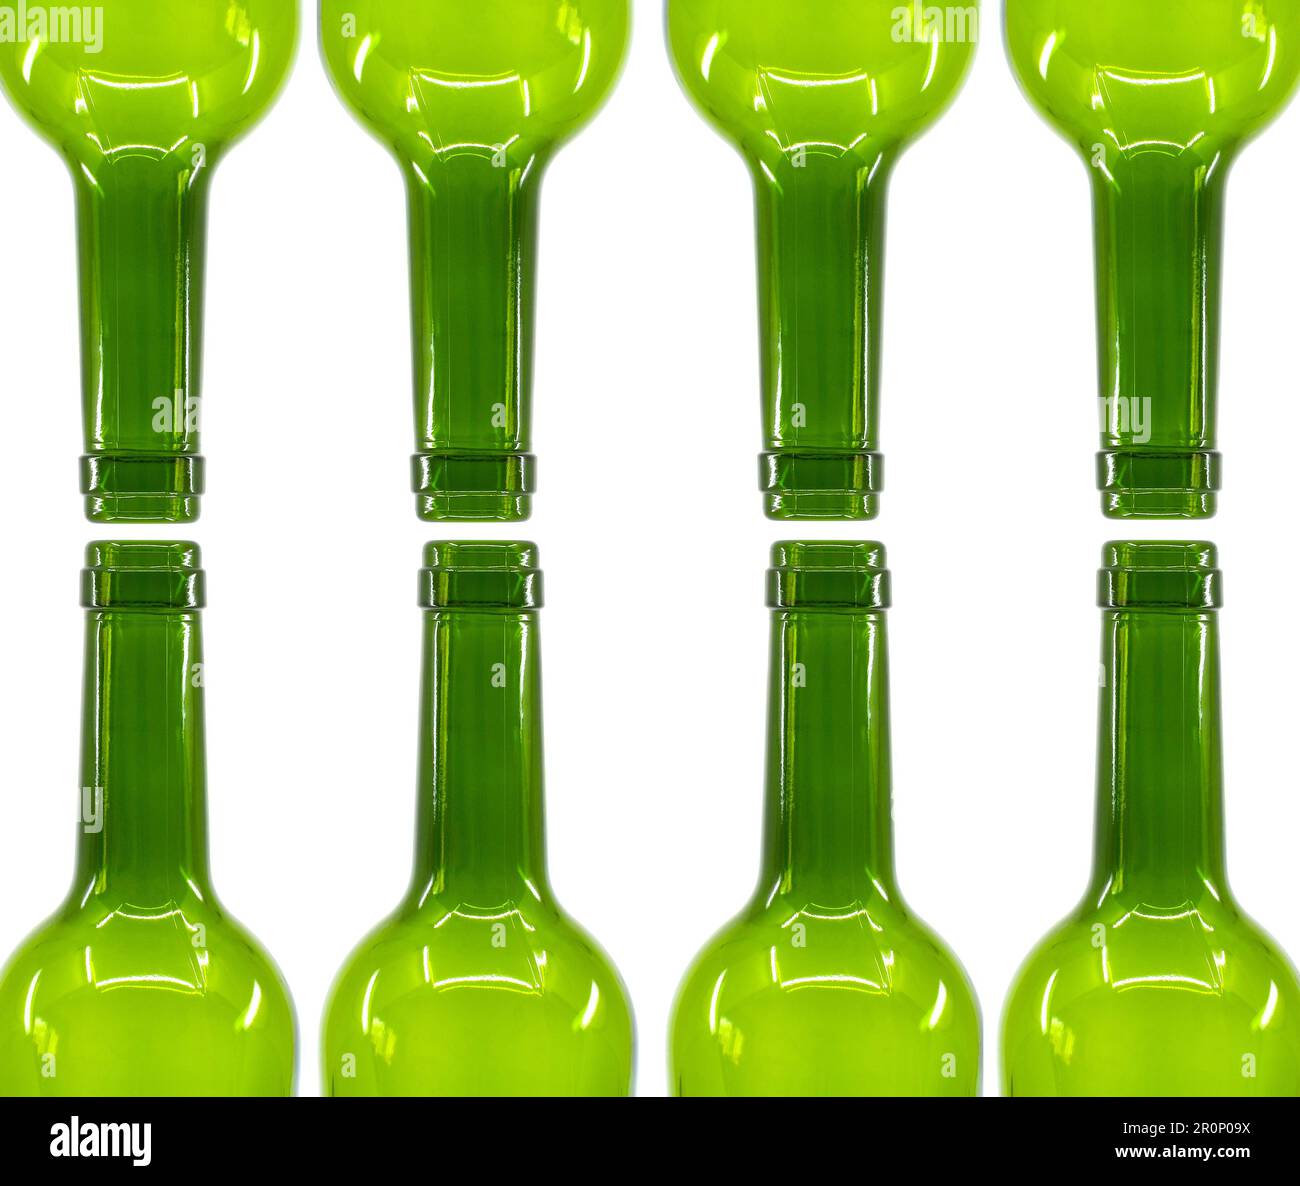 Rows of empty wine bottles isolated on a plain white background. Copy space. Alcohol consumption concept. Stock Photo